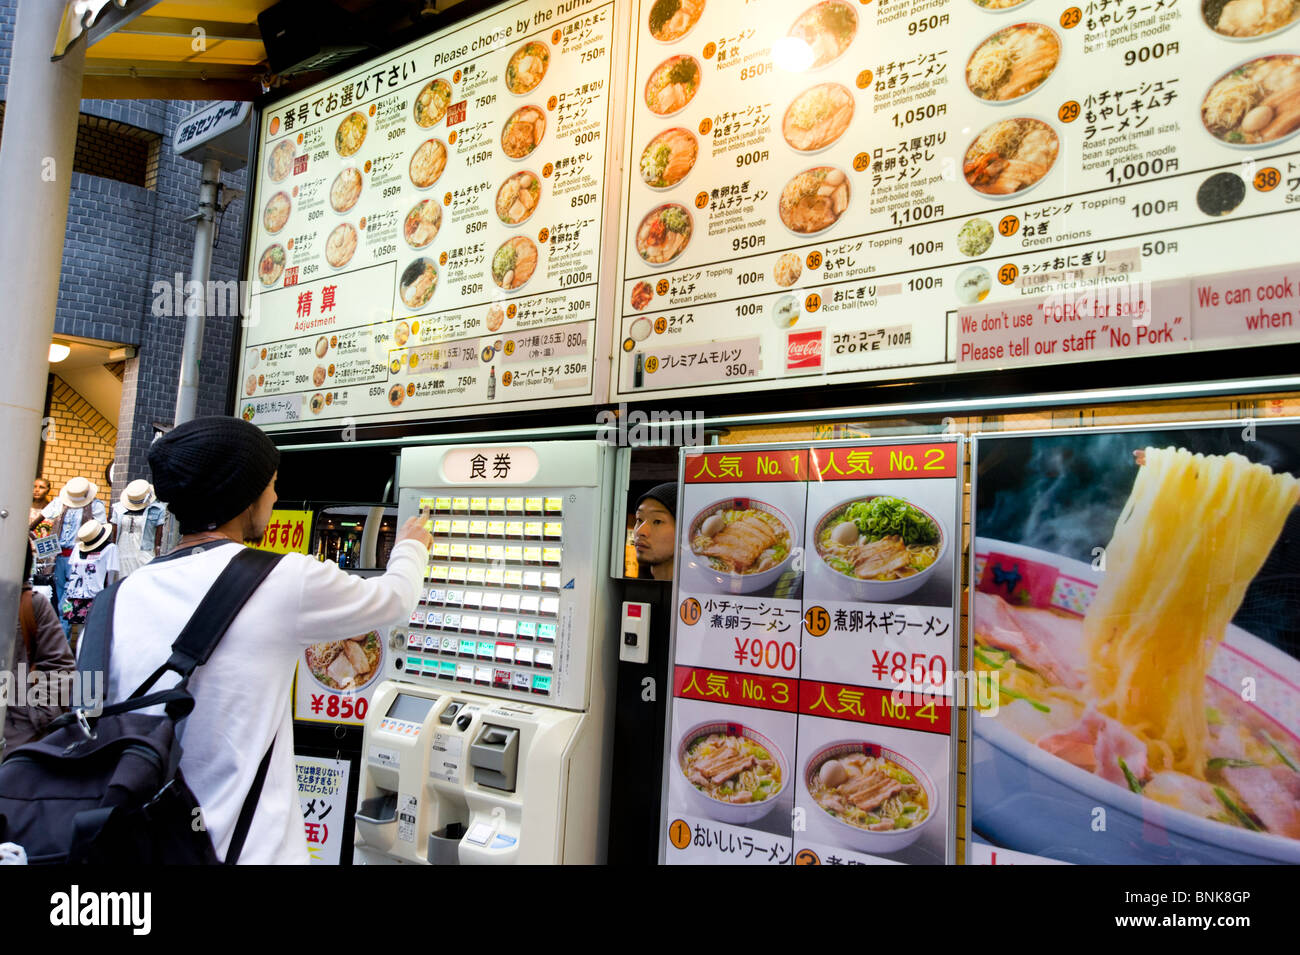 Using ticket dispensing machine to order food at cheap ramen and noodle eatery, Tokyo, Japan Stock Photo